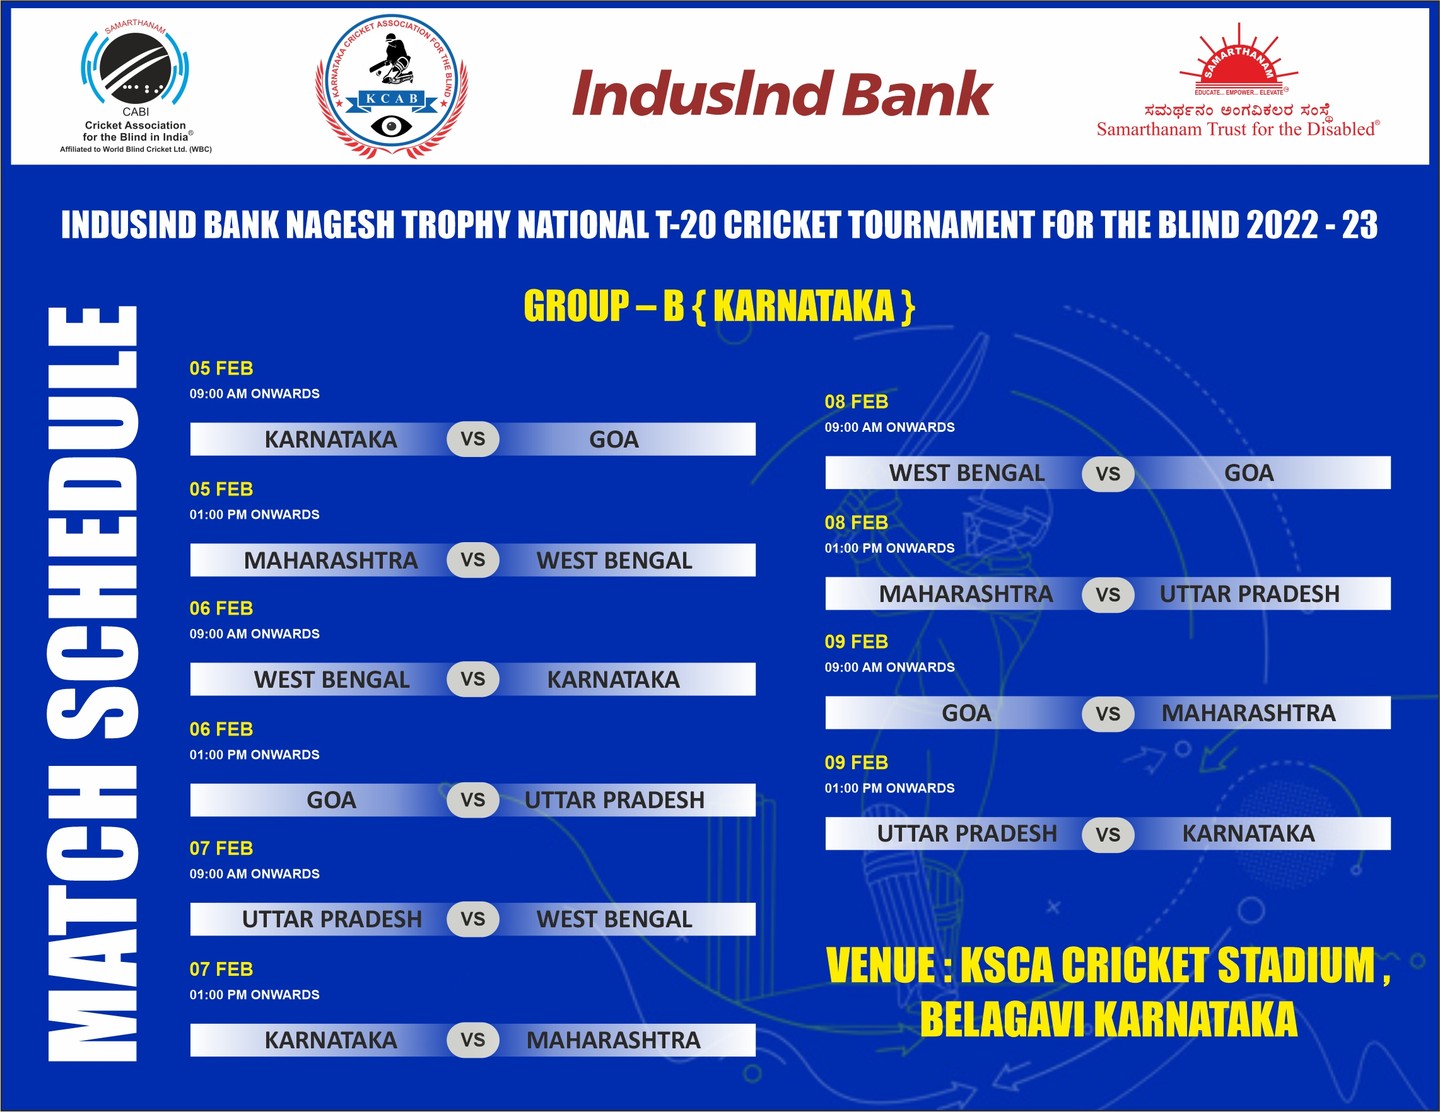 Match Schedule of Group B – IndusInd Bank Nagesh Trophy National T20 Cricket Tournament for the Blind 2022 – 2023